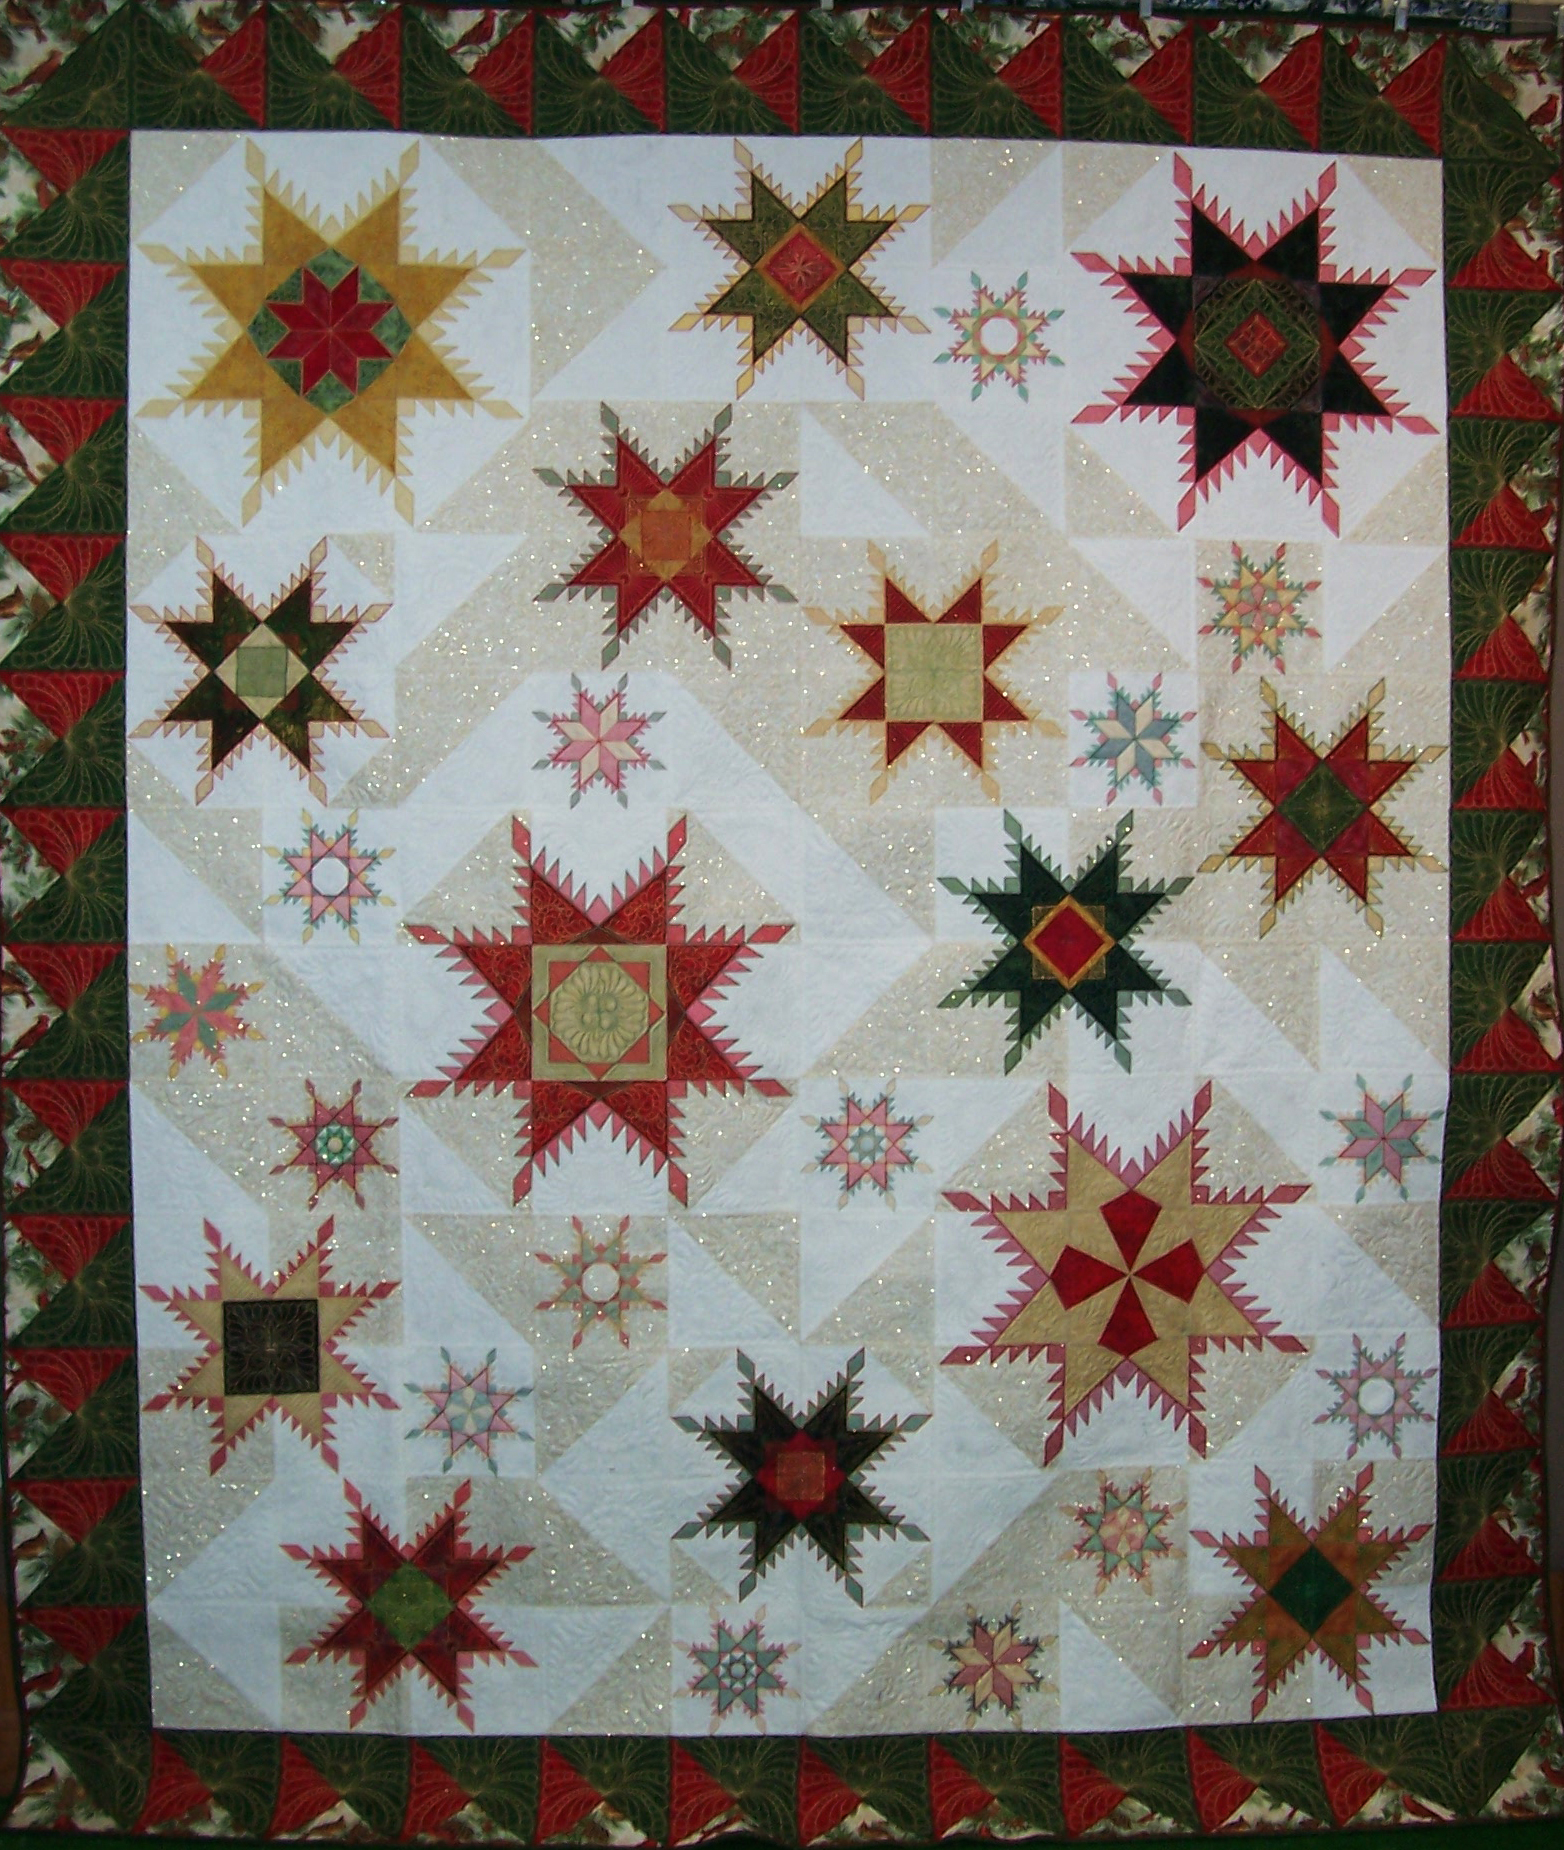 FEATHERED STAR CYBER QUILT SHOW - HOOPSISTERS